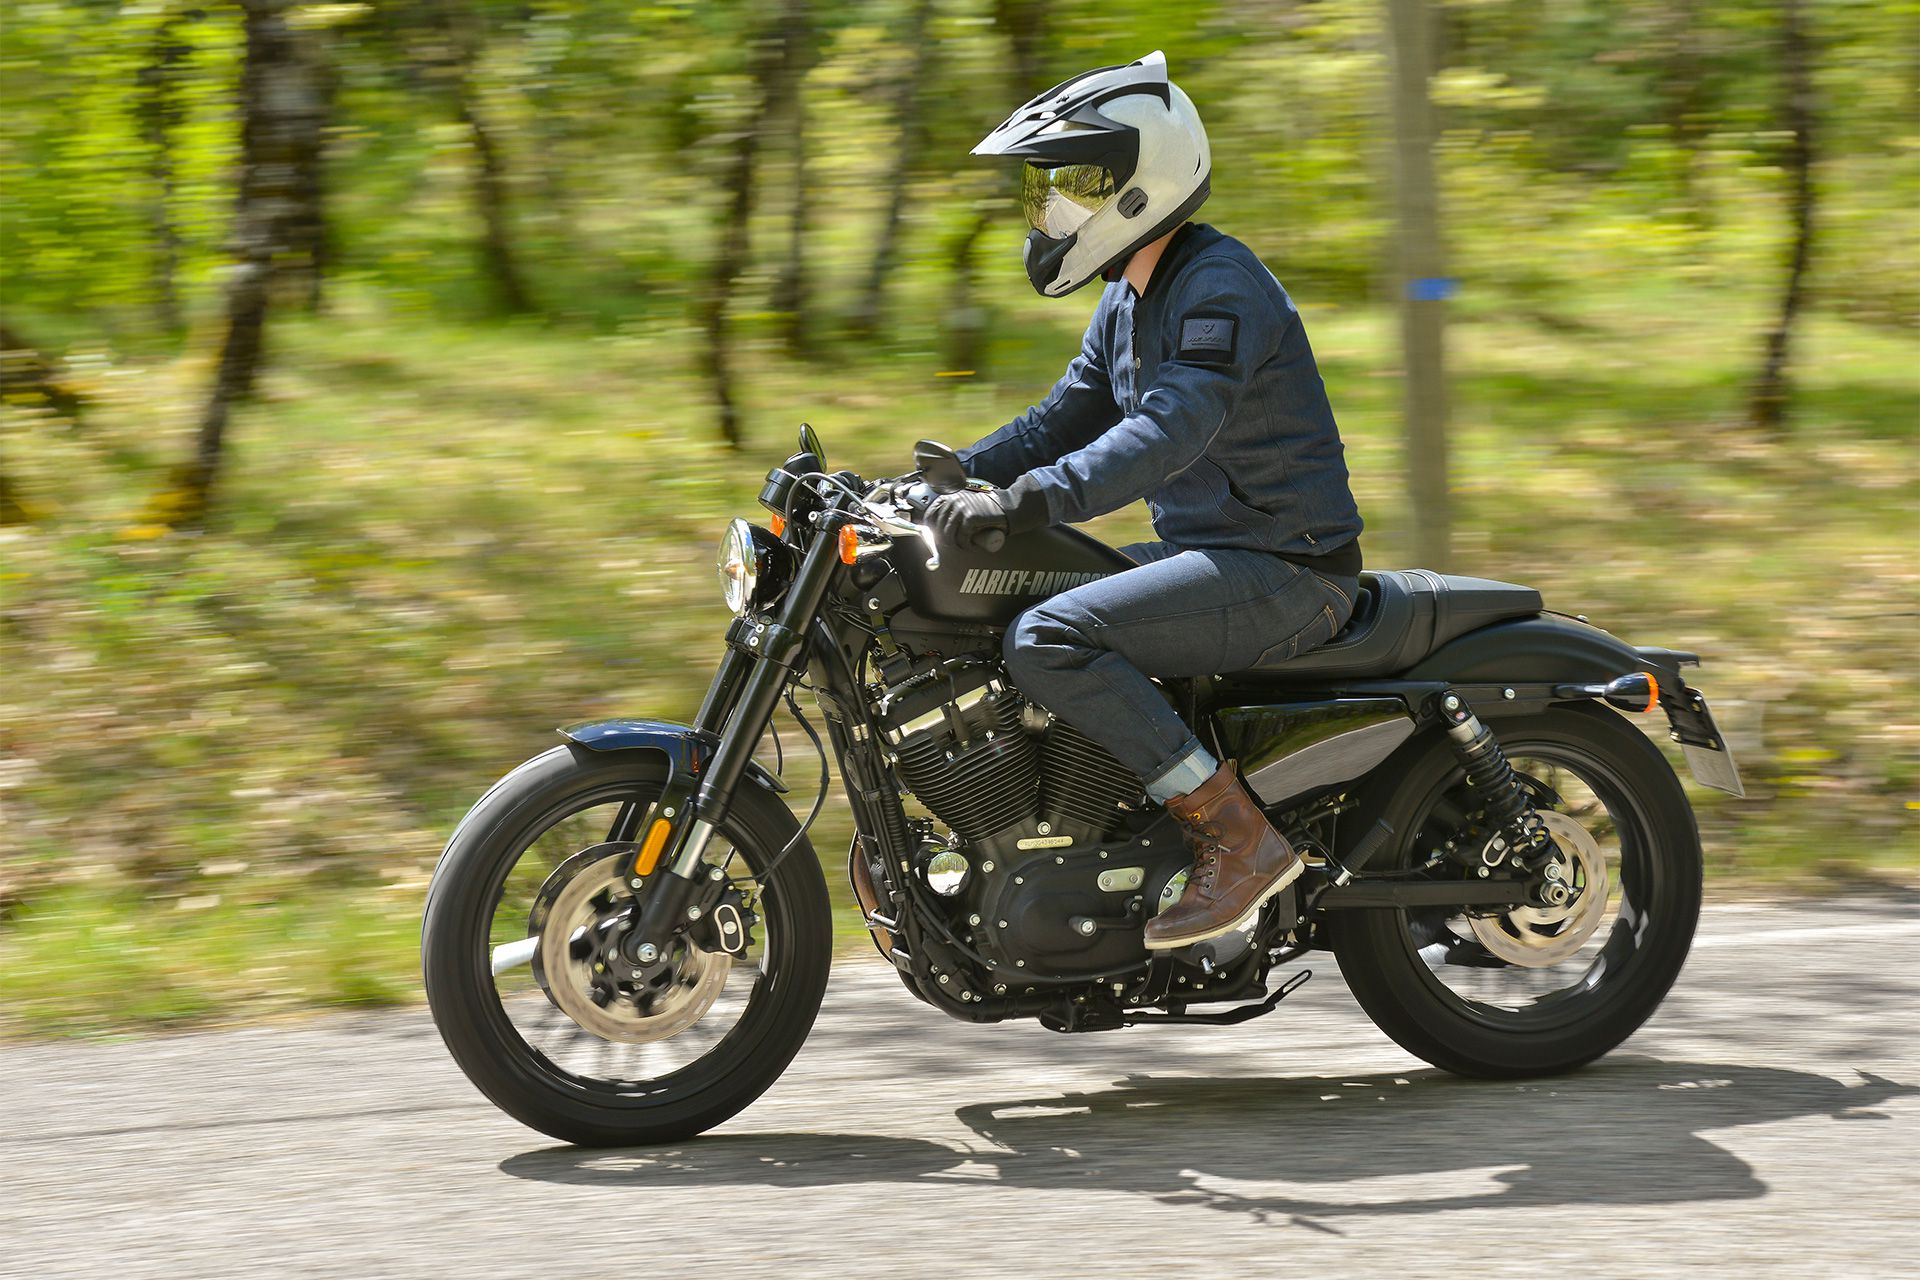 2016 Harley Davidson Roadster First Ride Review Cycle World